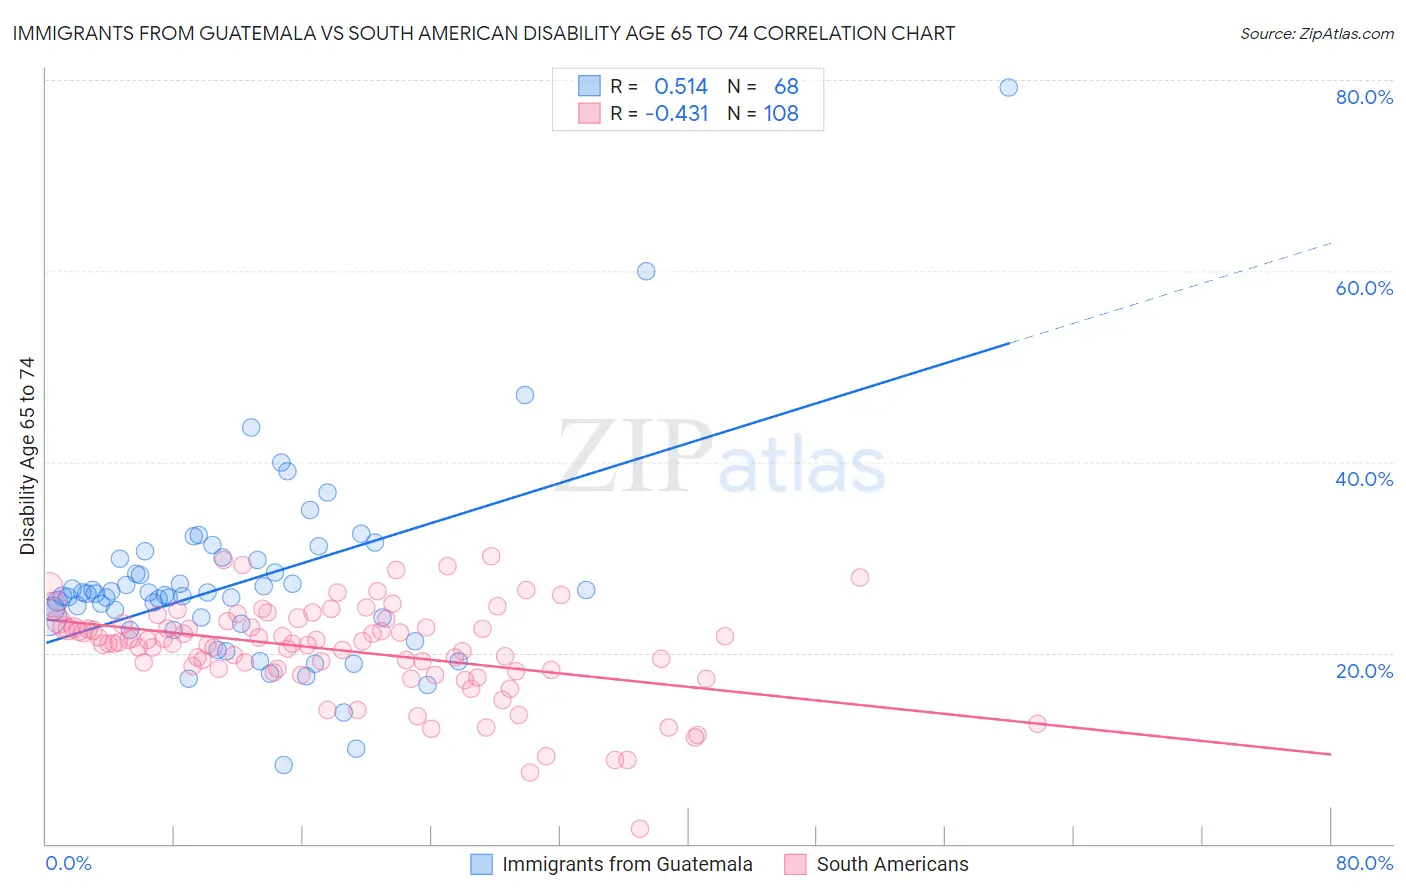 Immigrants from Guatemala vs South American Disability Age 65 to 74